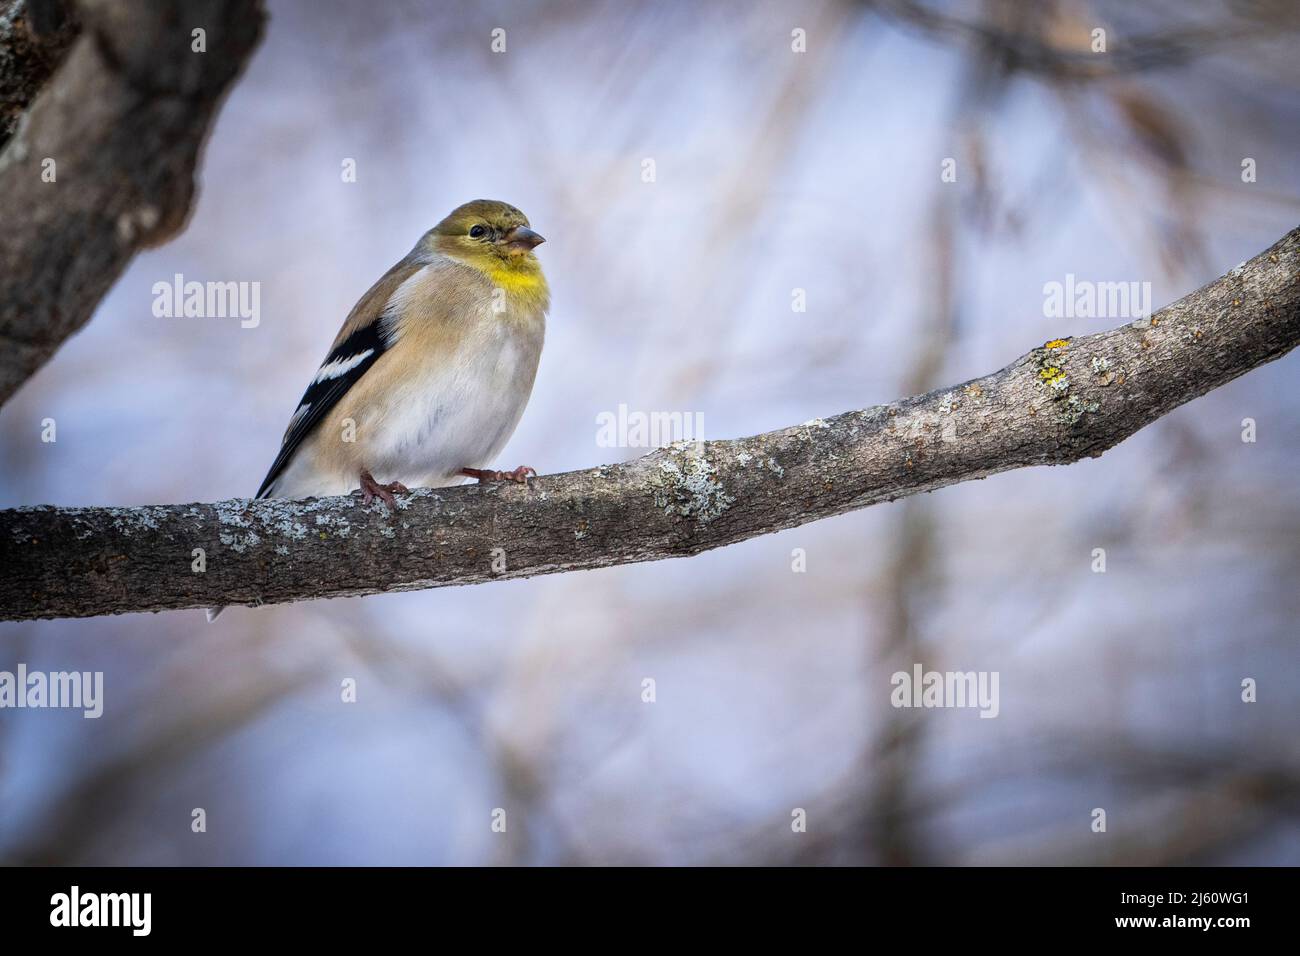 American goldfinch eating sunflower seeds in a park during a winter day. Stock Photo